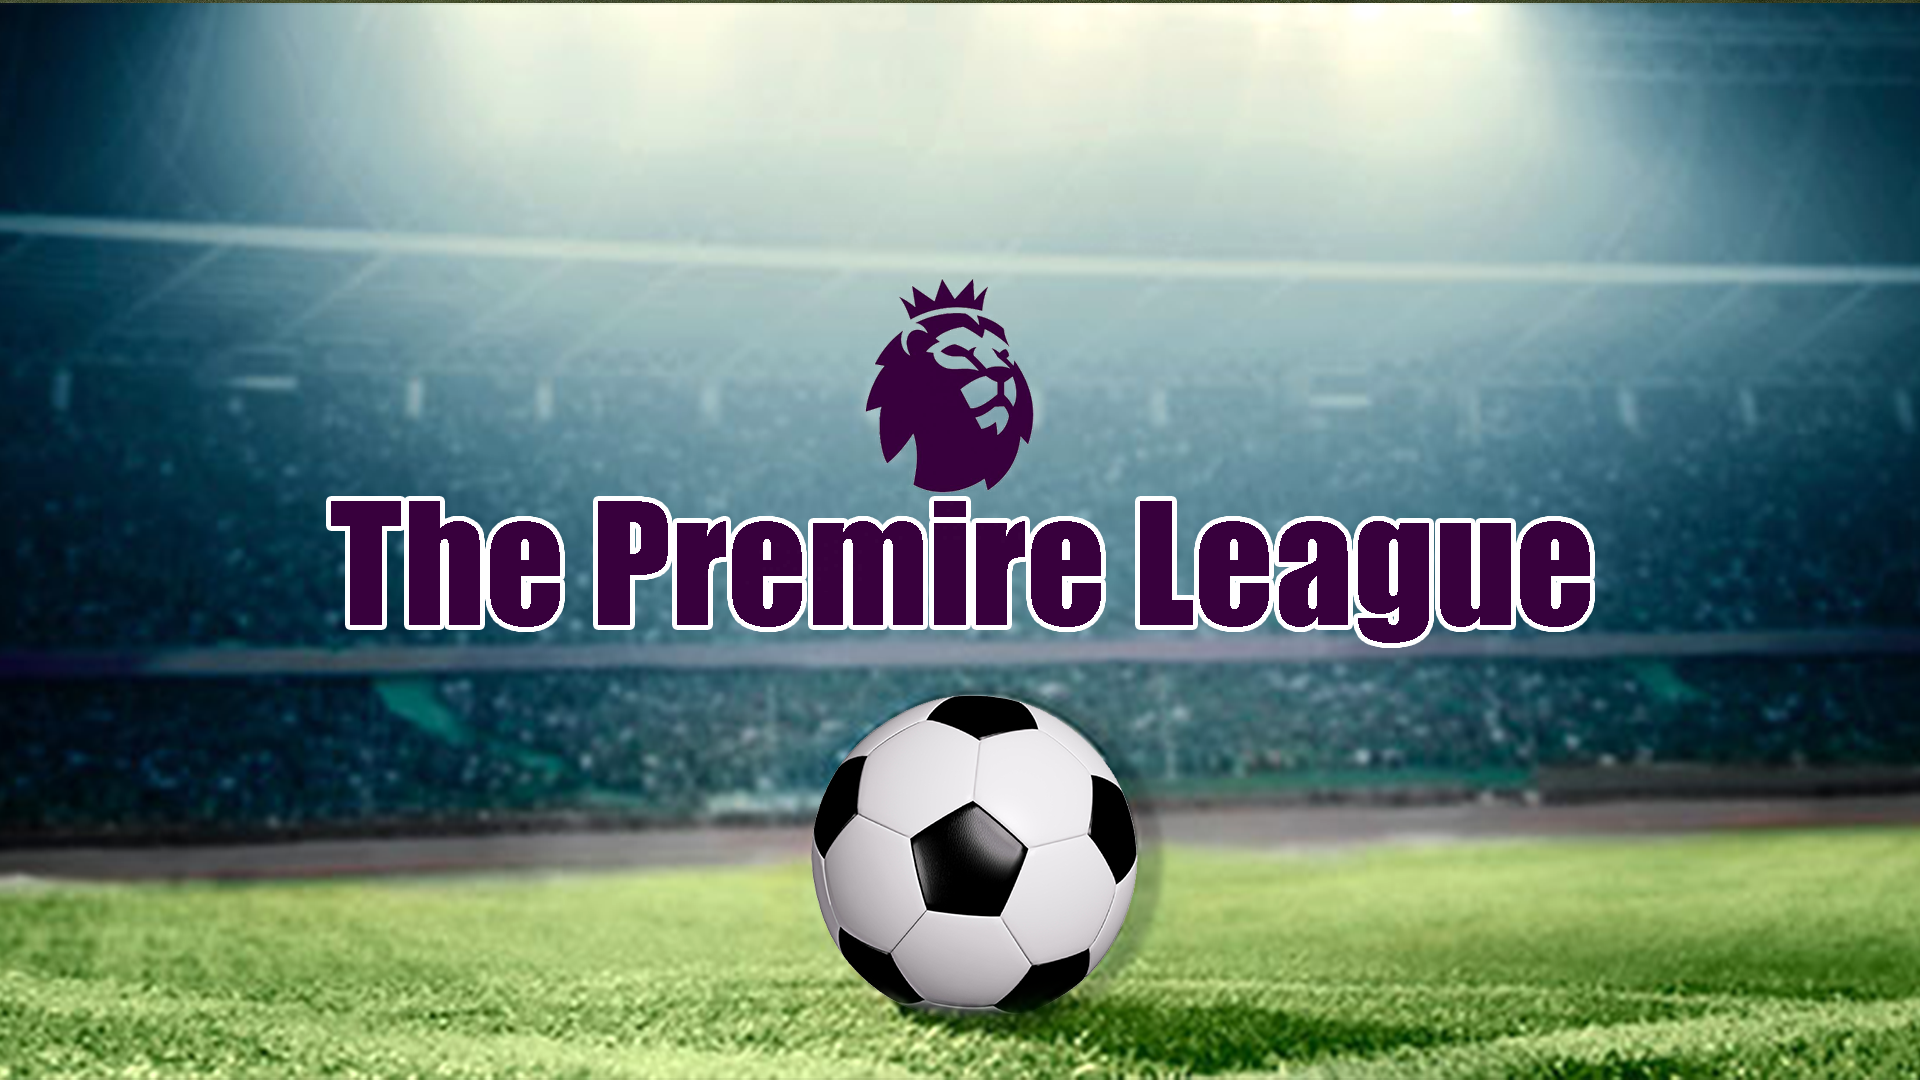 EPL to be broadcast on free-to-air TV - 2077 Jestha 05